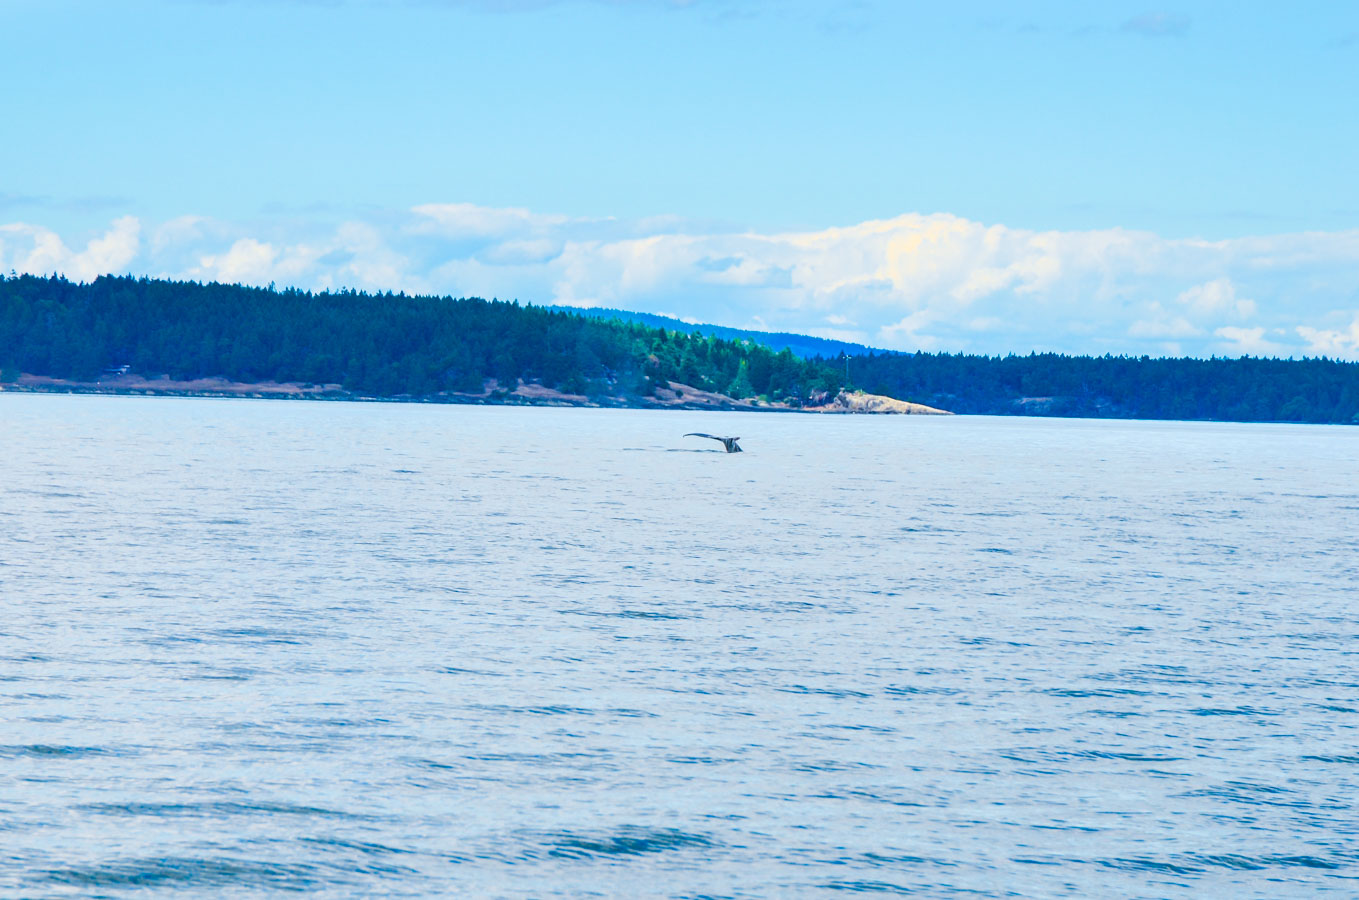 What to Do in Victoria, B.C. Travel Guide | Whale Watching